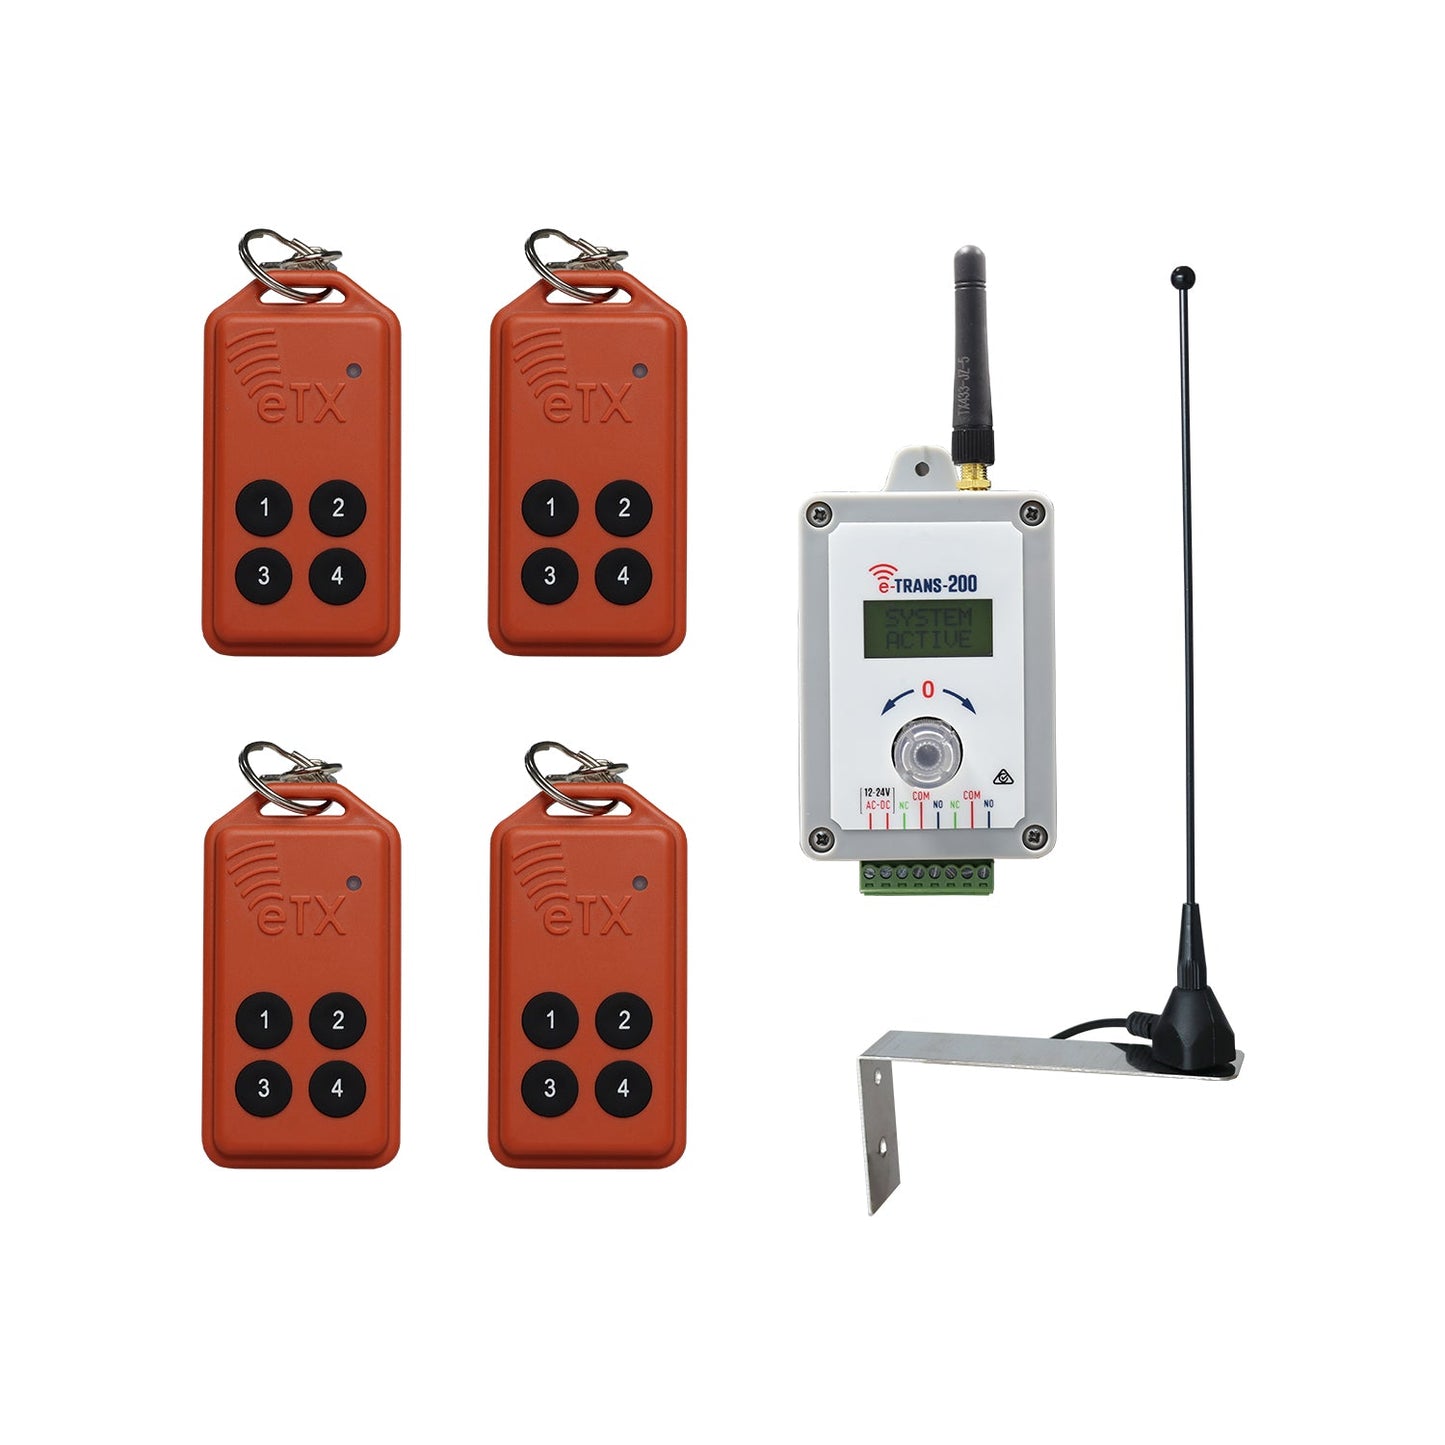 Long range remote system with 12 dBI antenna covering 350M line of sight & 4x E-TX - ASD Trade Direct